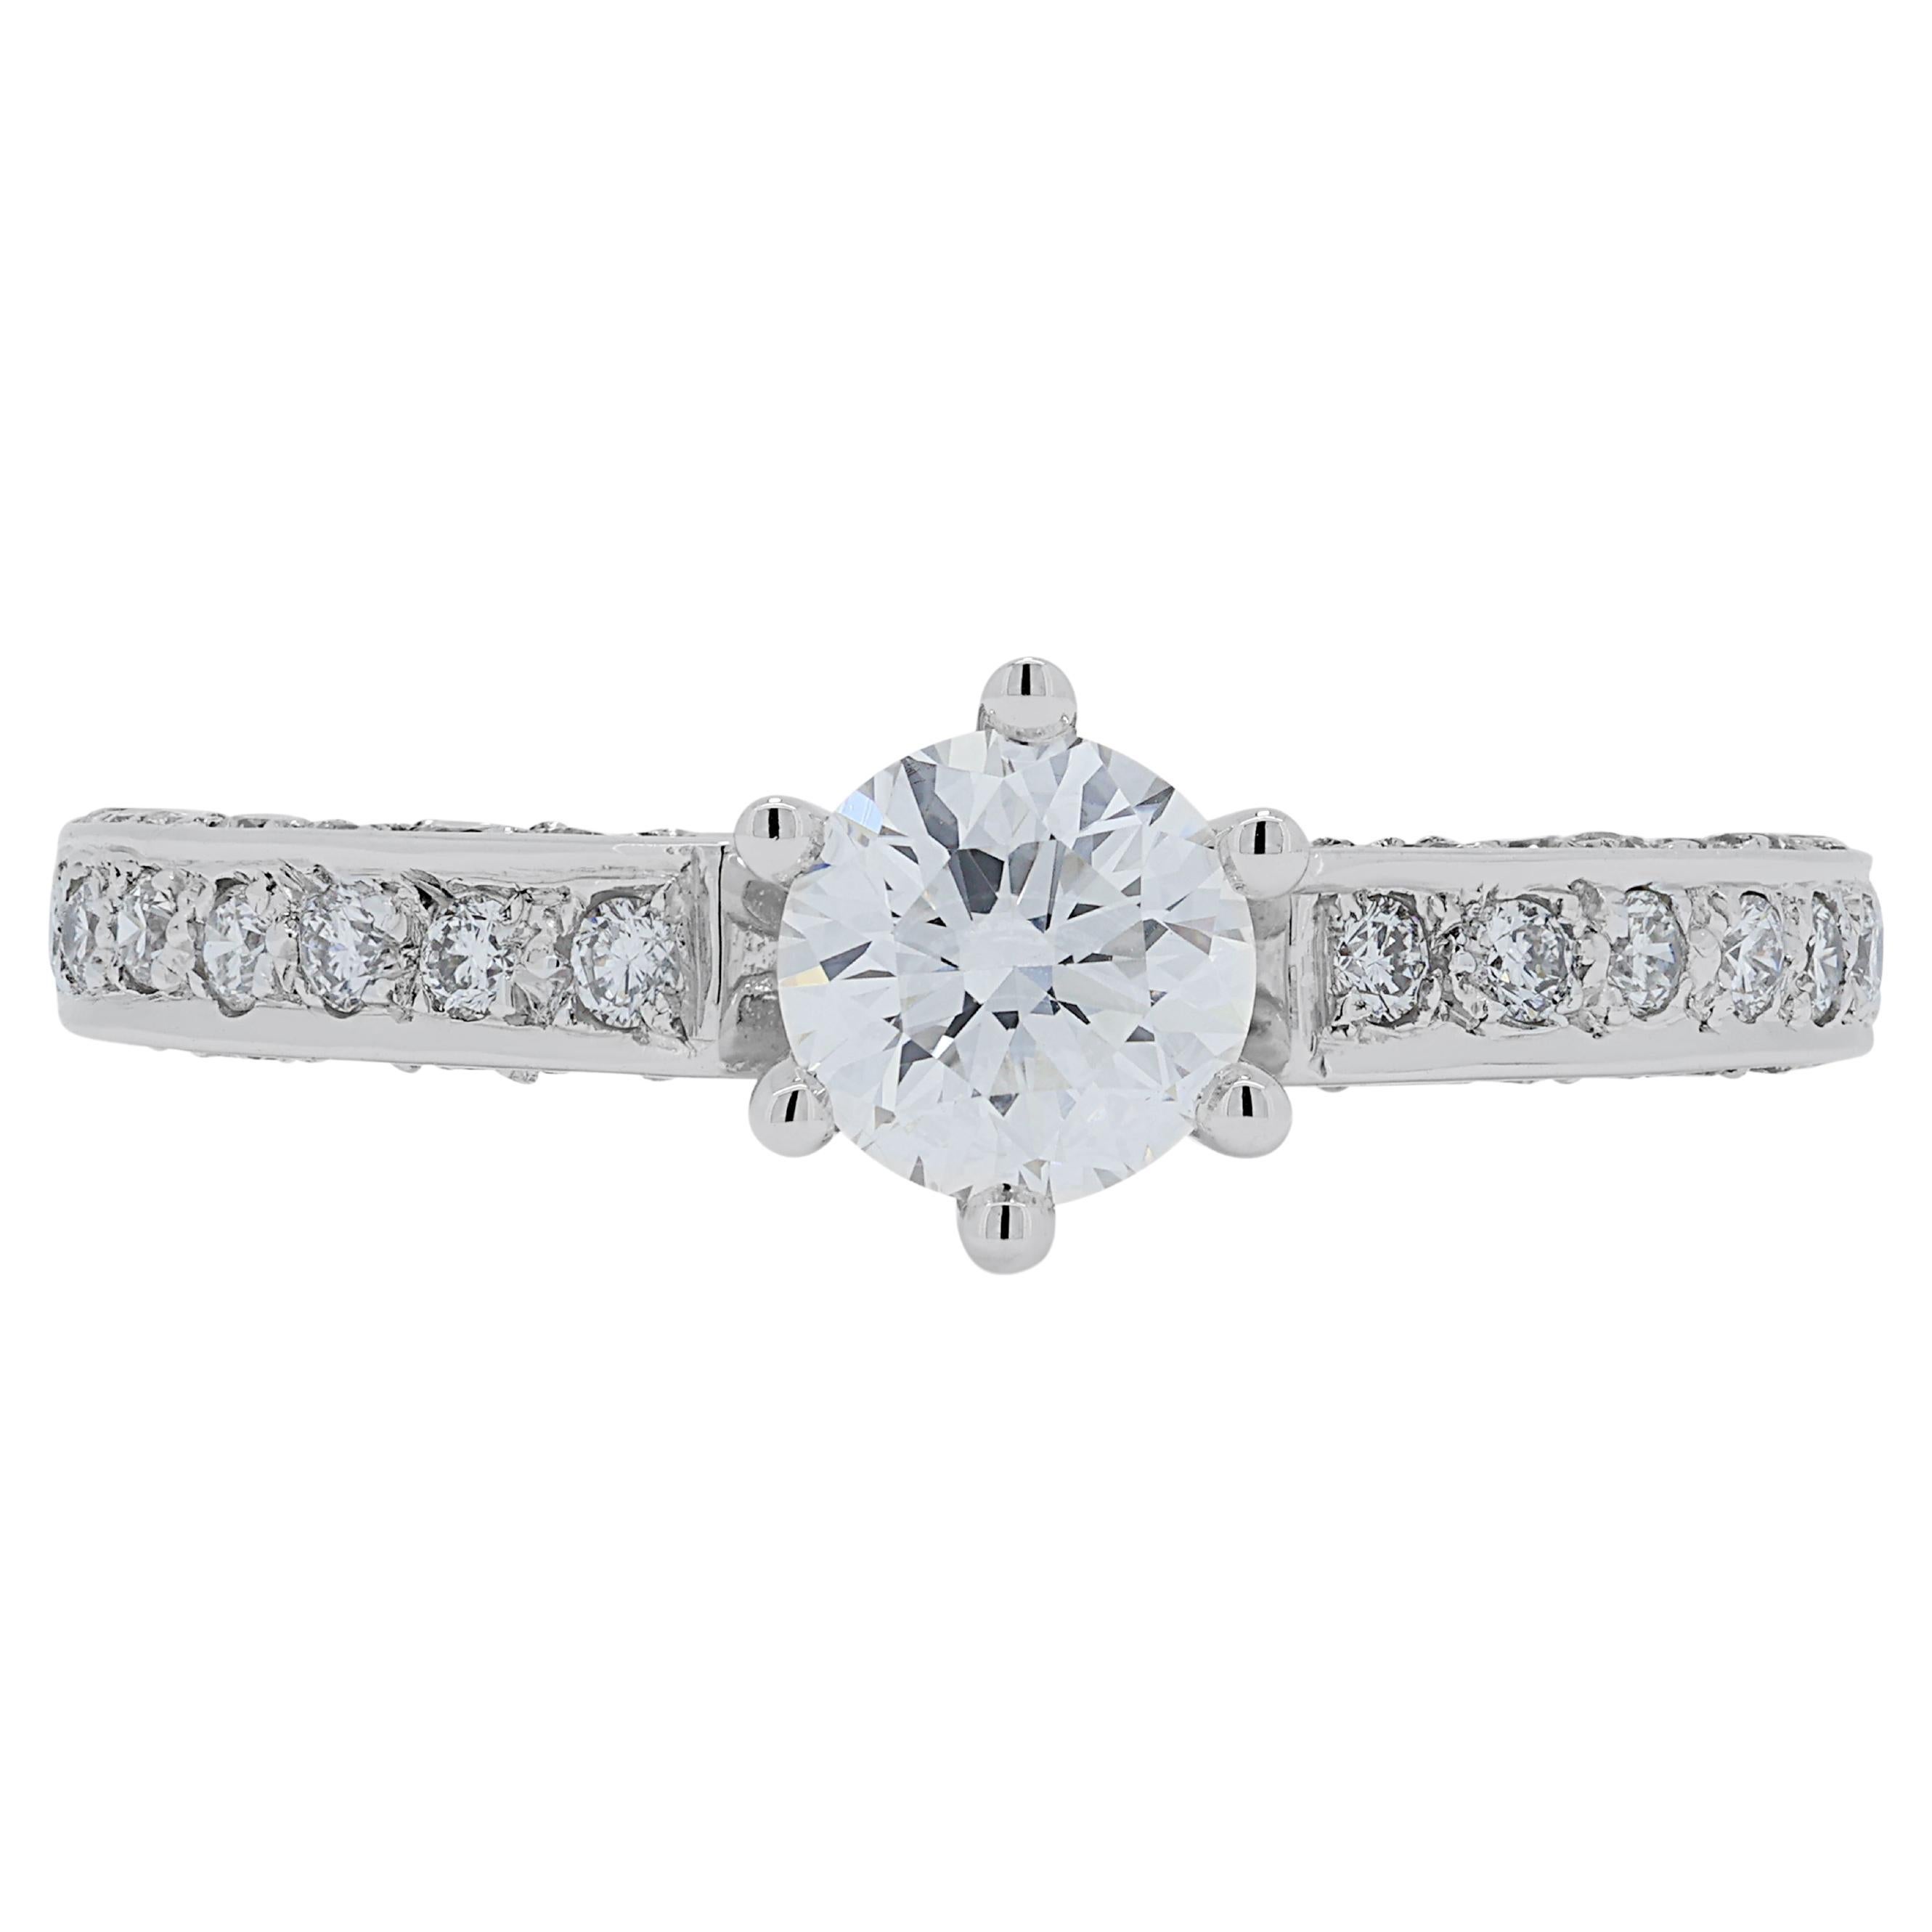 Stunning 0.51ct Diamond Pave Ring with Side Diamonds in 18K White Gold